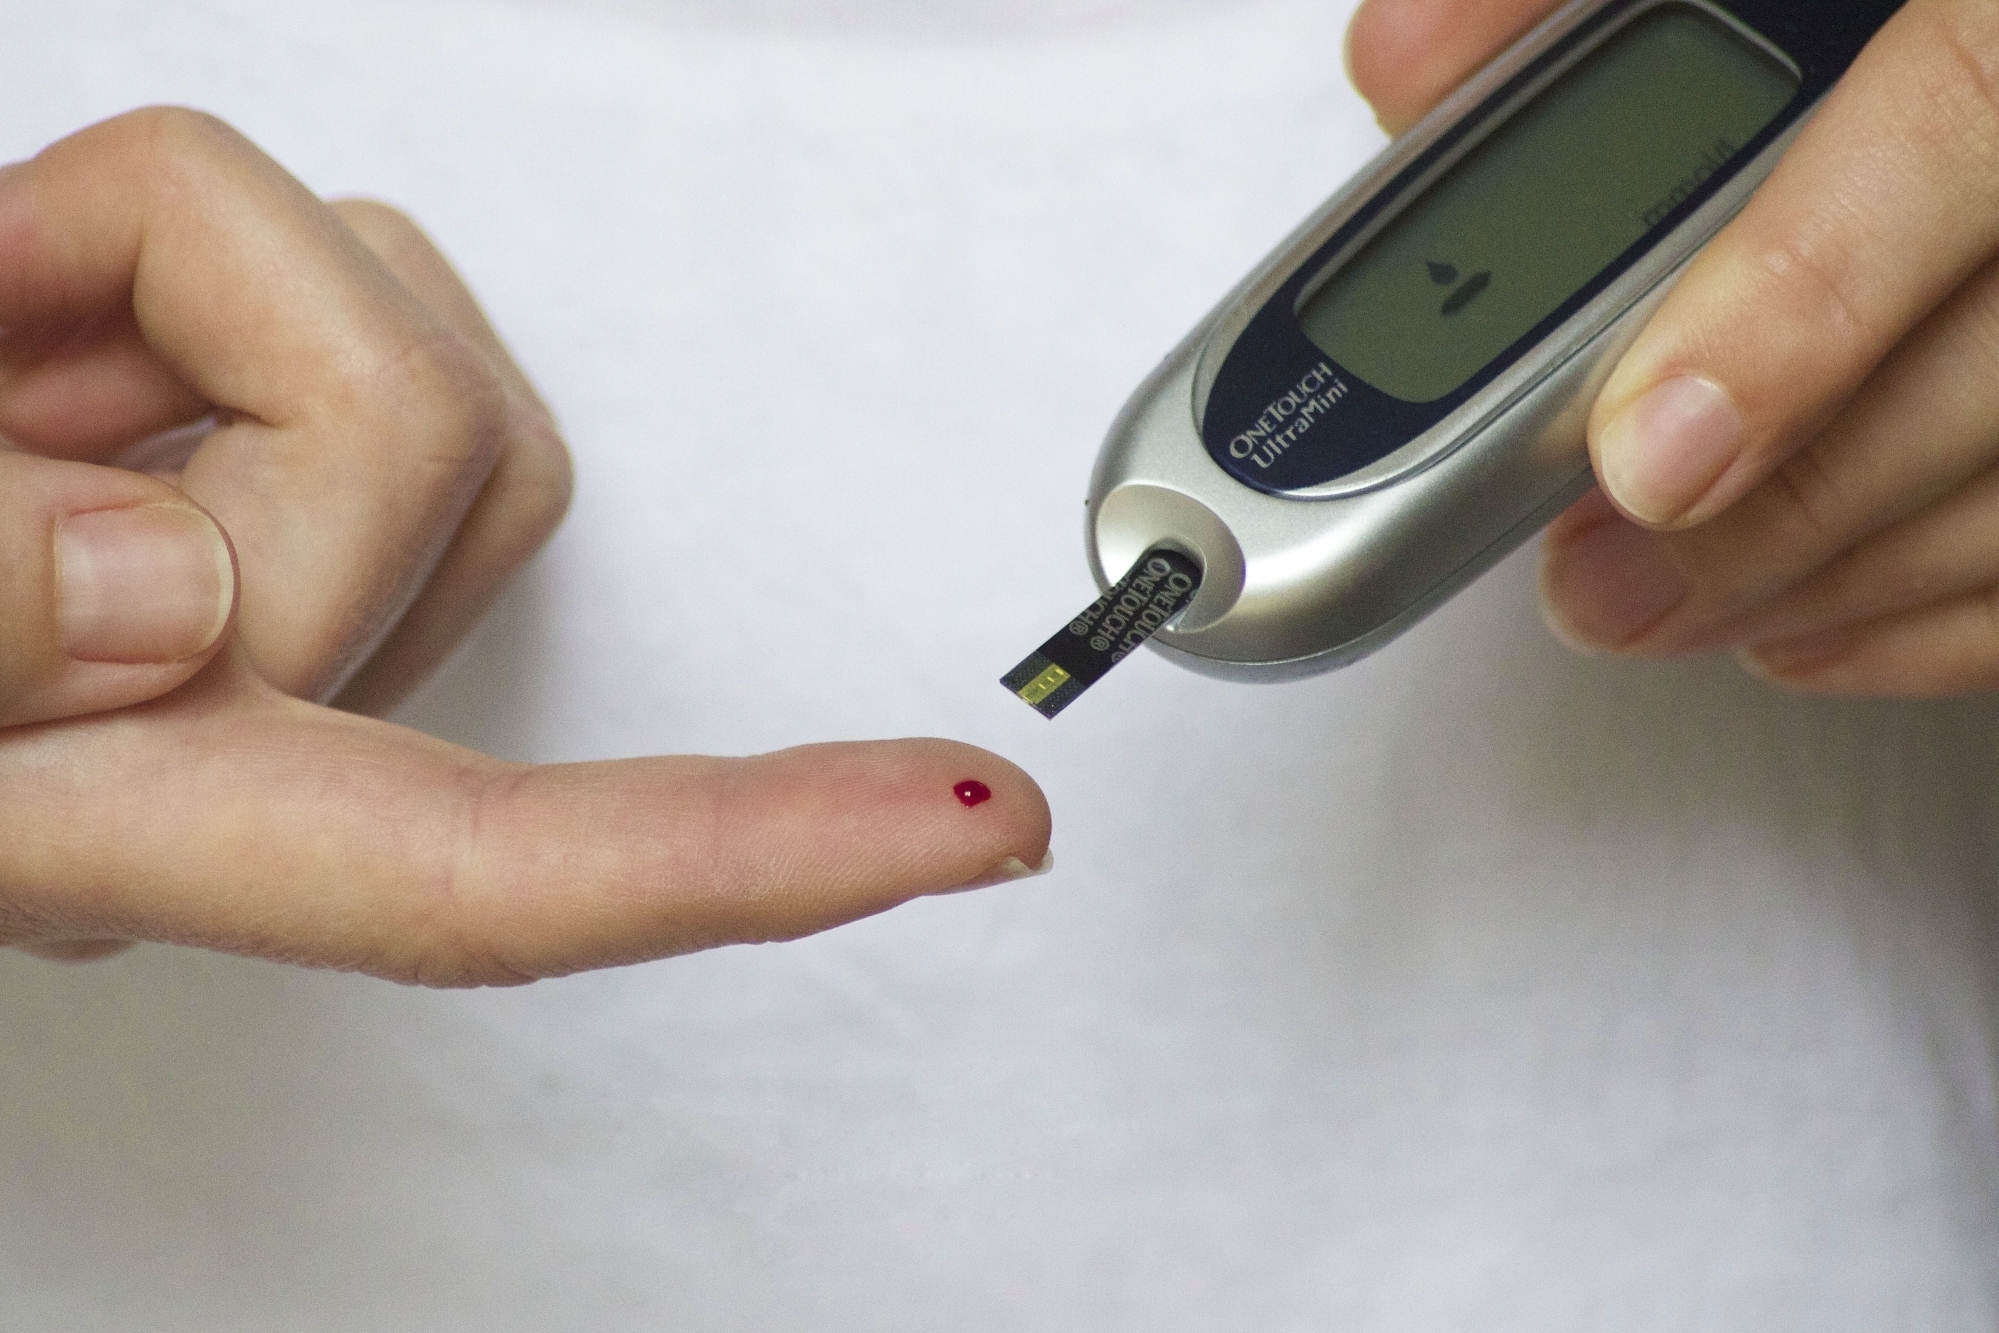 India's life expectancy rises; diabetes, hypertension rate high: Report